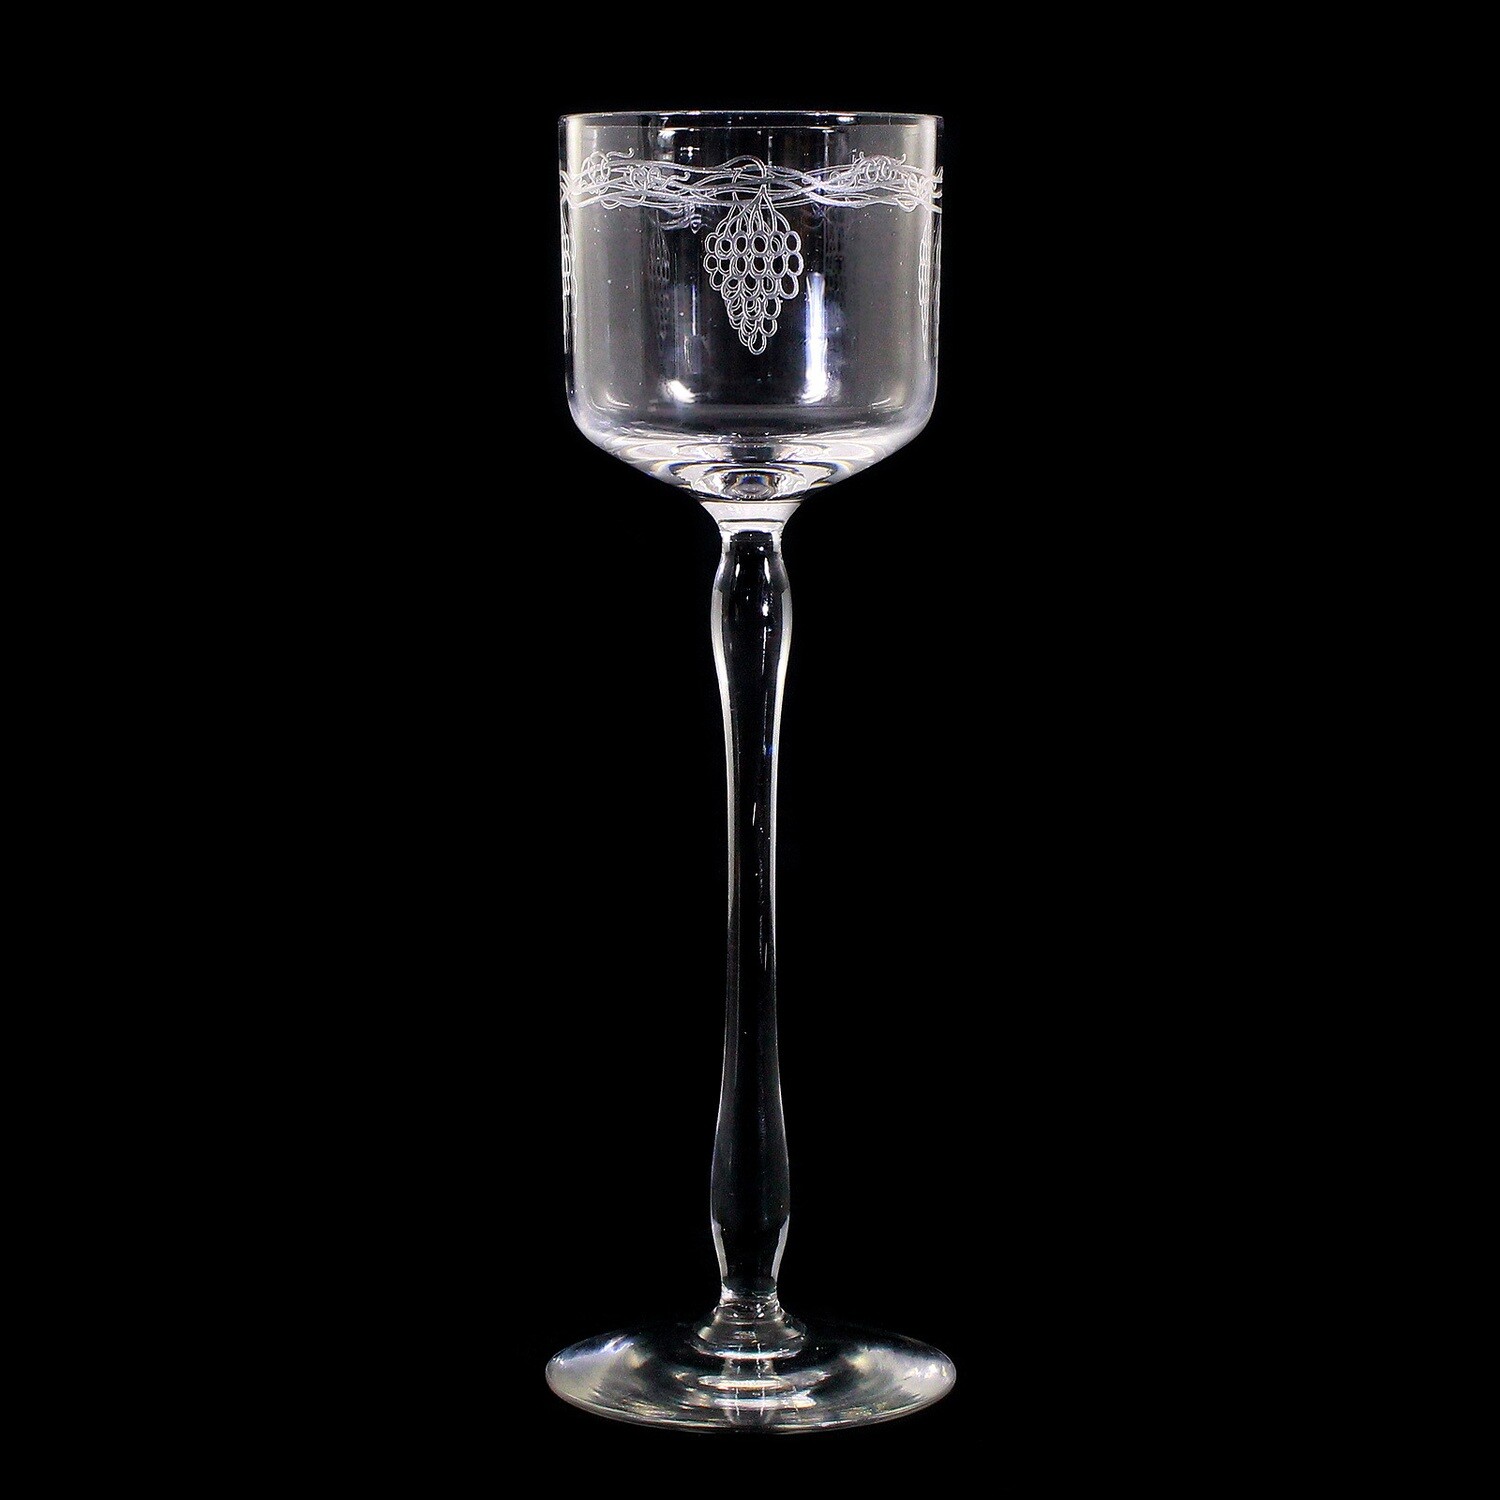 Stem glass with etched vine decoration in four repeats, around 1900-10